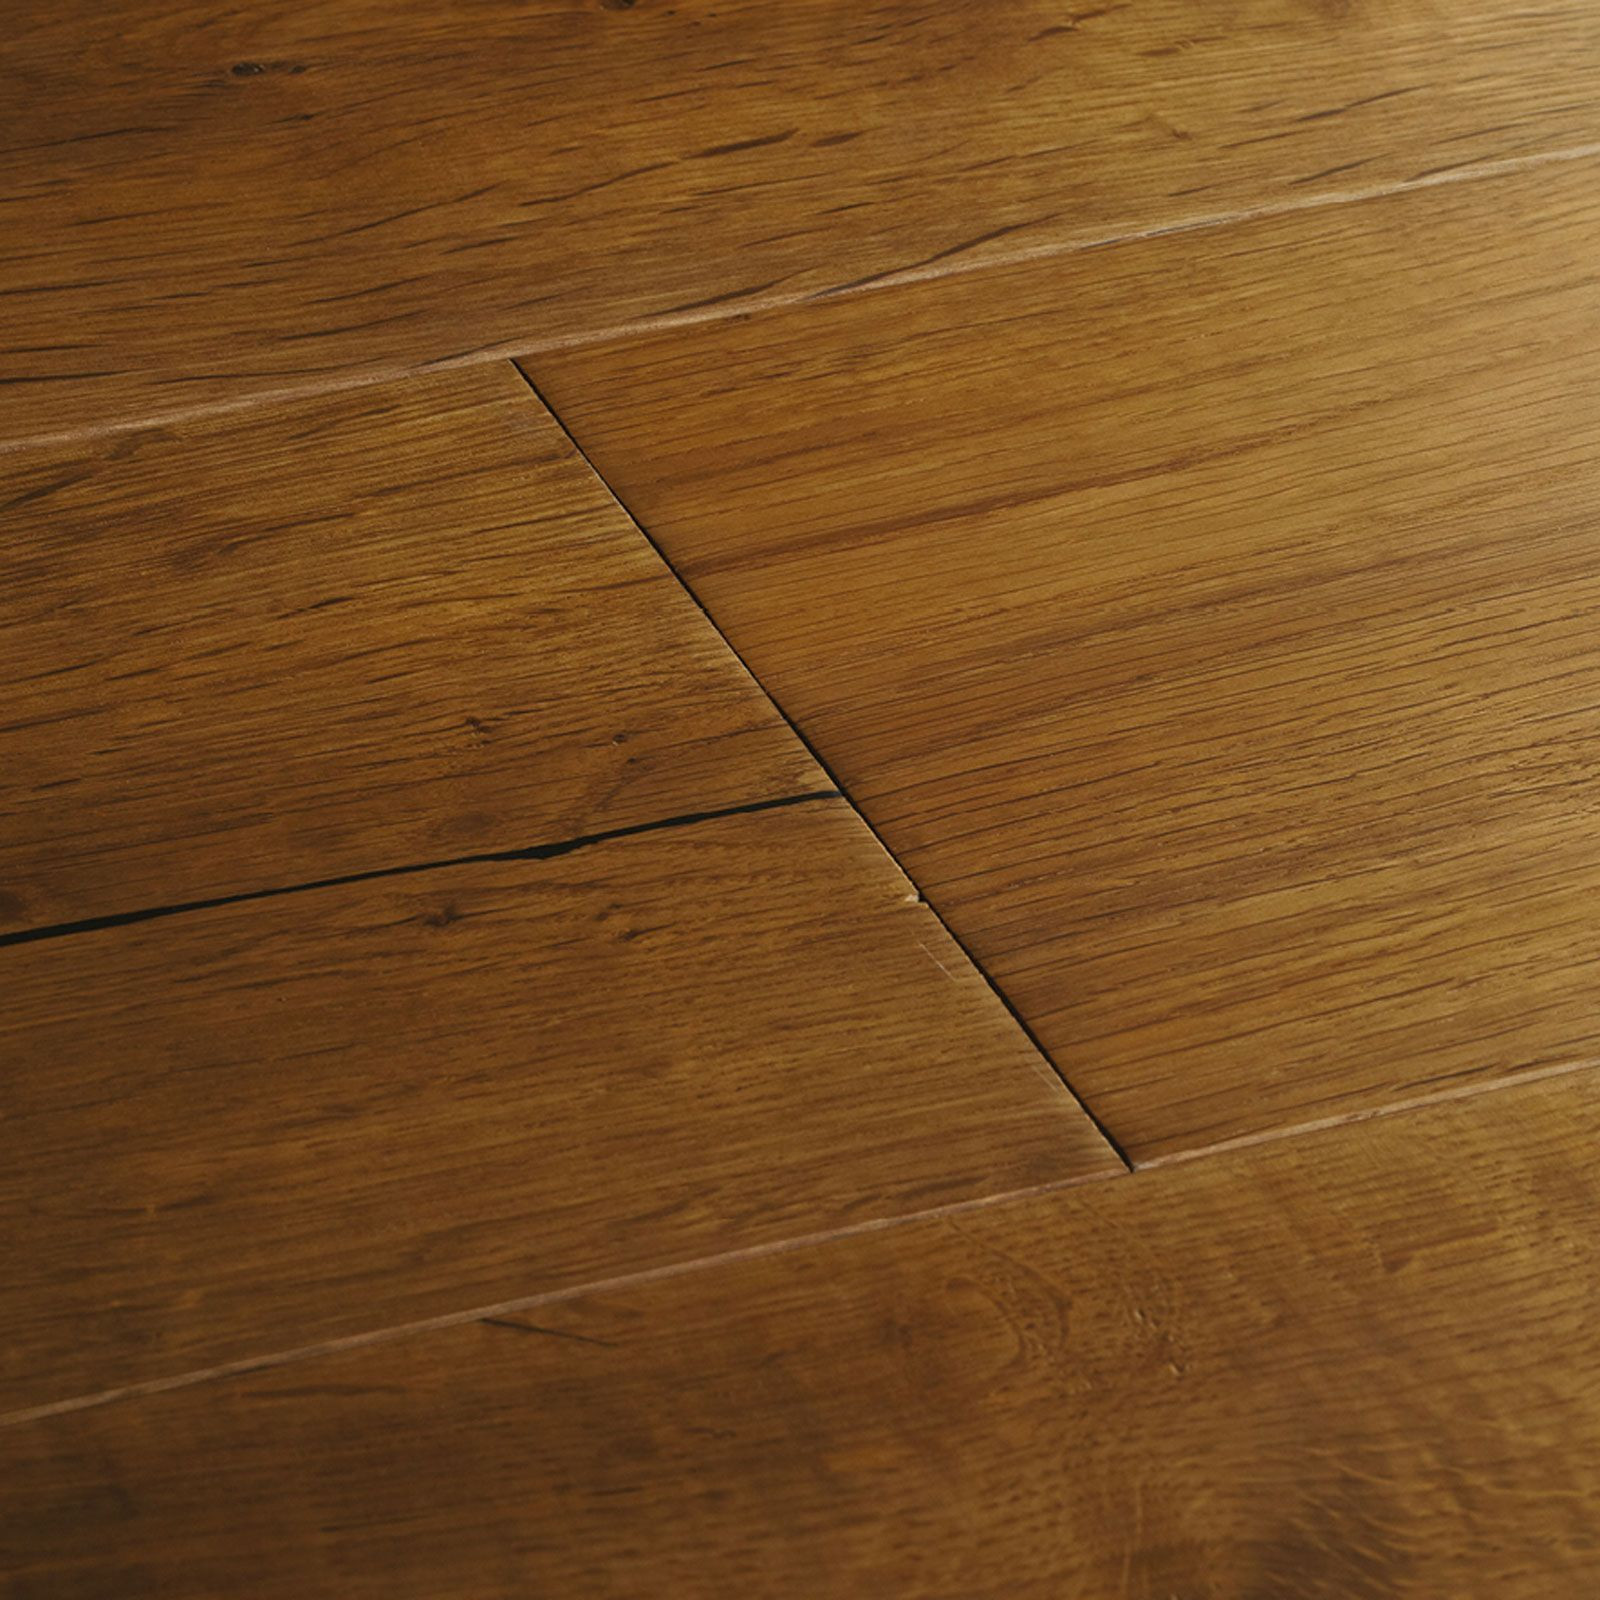 12 Trendy Hardwood Floor Refinishing Louisville Ky 2024 free download hardwood floor refinishing louisville ky of dahuacctvth com page 57 of 80 flooring decoration ideas page 57 throughout thickness of laminate flooring